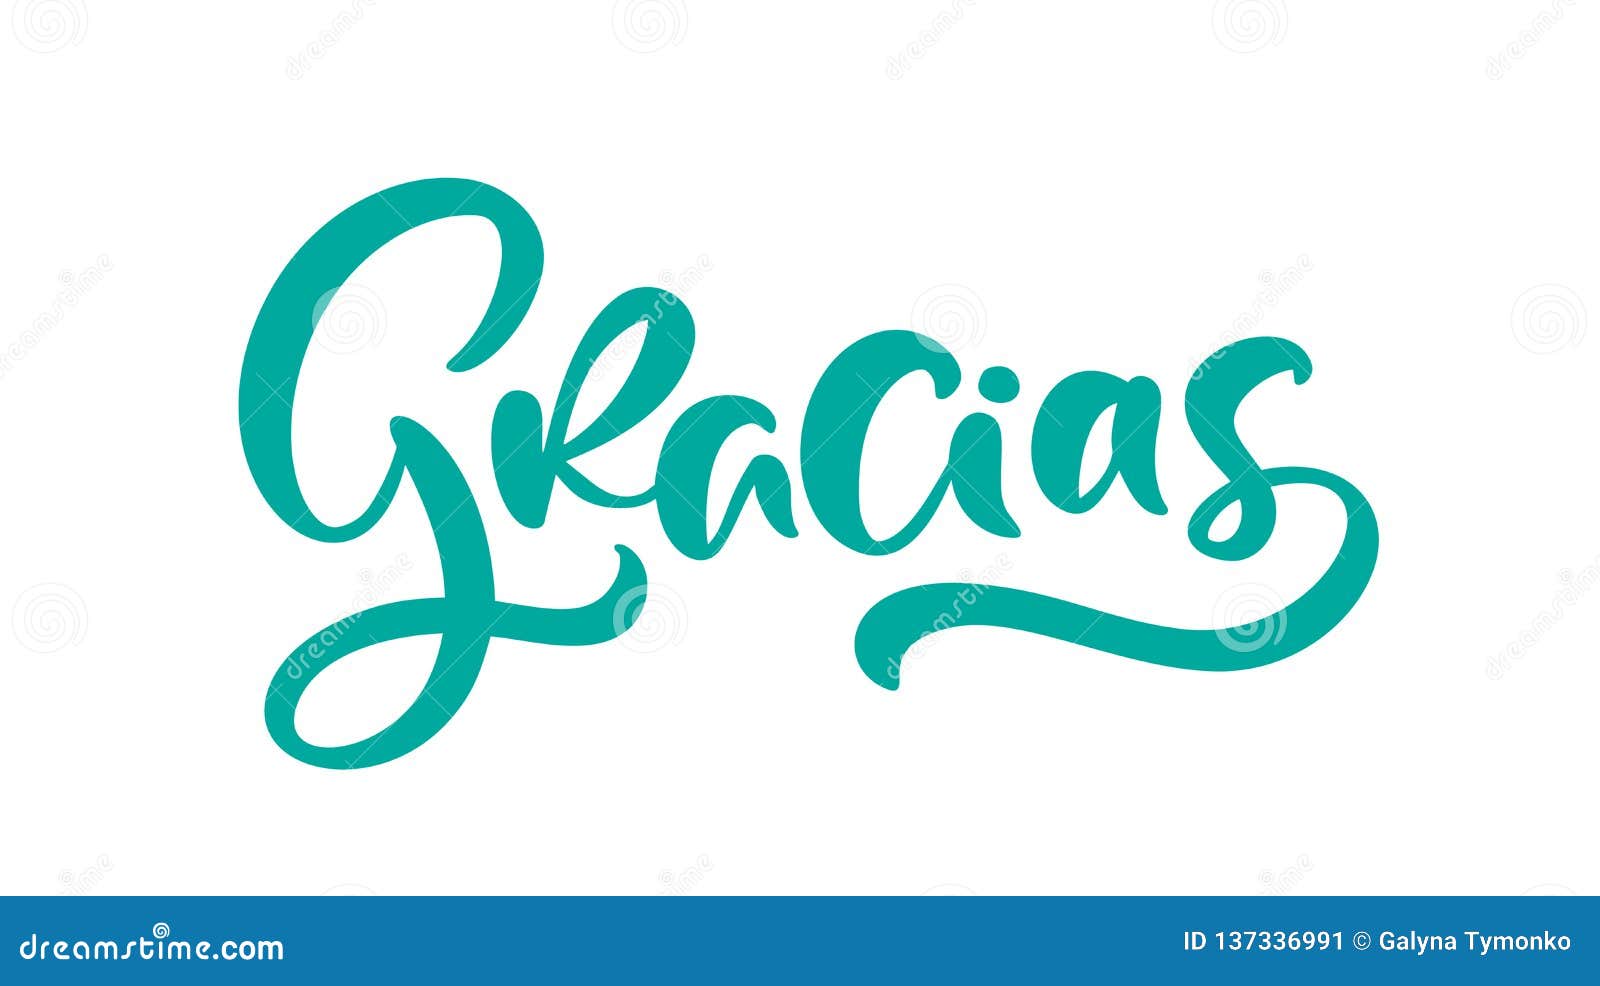 Gracias Hand Written Lettering. Modern Brush Calligraphy. Thank You In